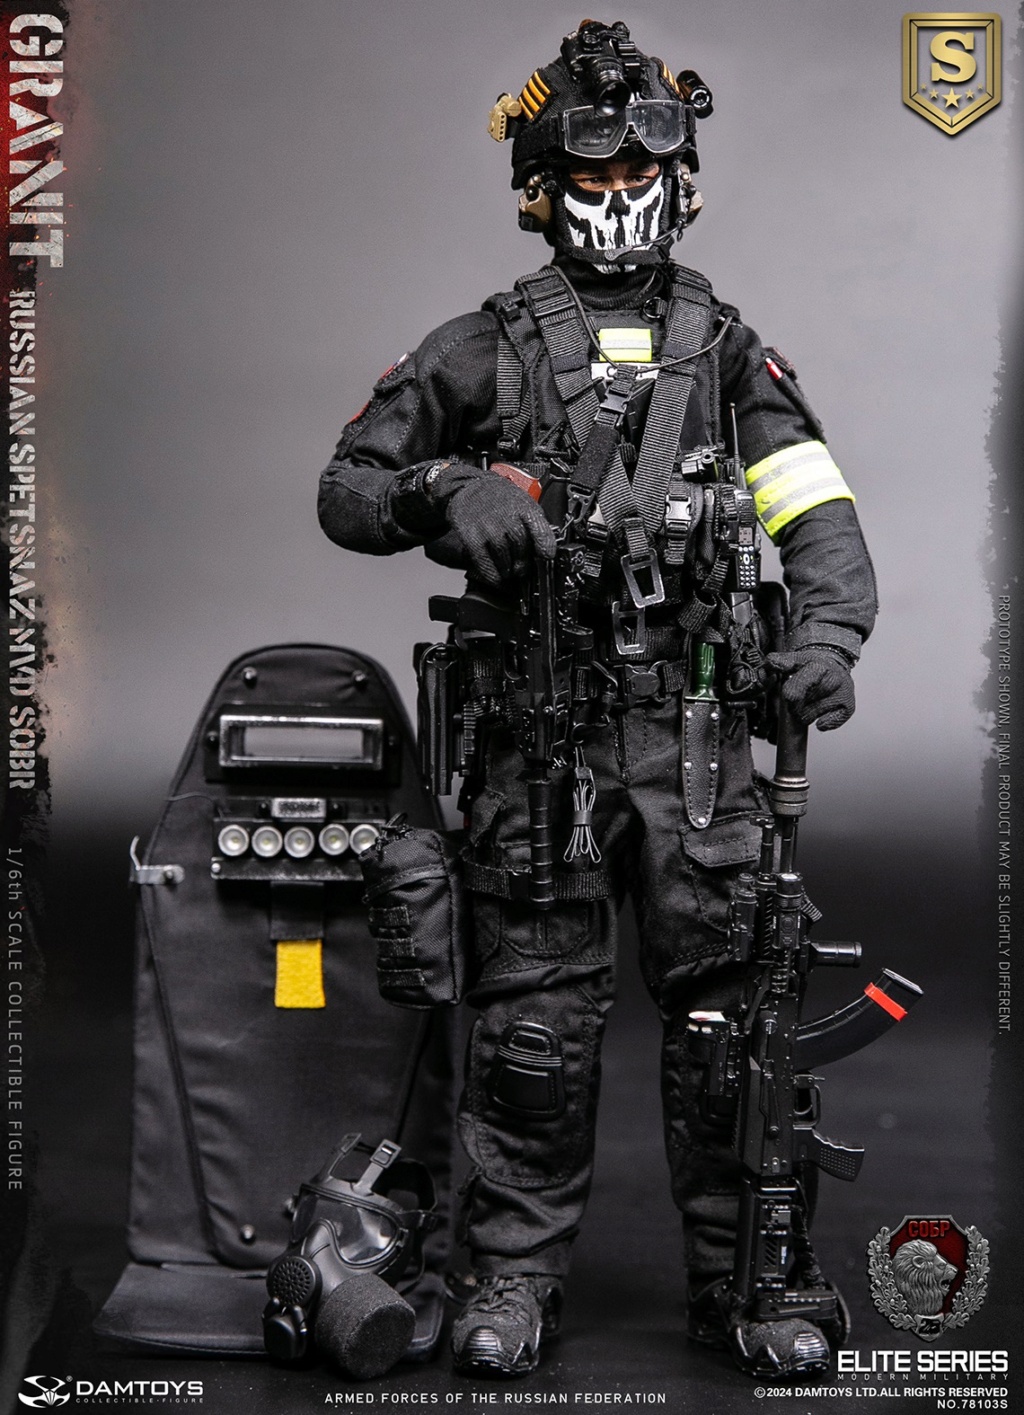 NEW PRODUCT: DAMTOYS: 1/6 Russian Federation Ministry of Internal Affairs MVD-Granite Special Response Team 78103S Special Edition/Elite Edition 11393010